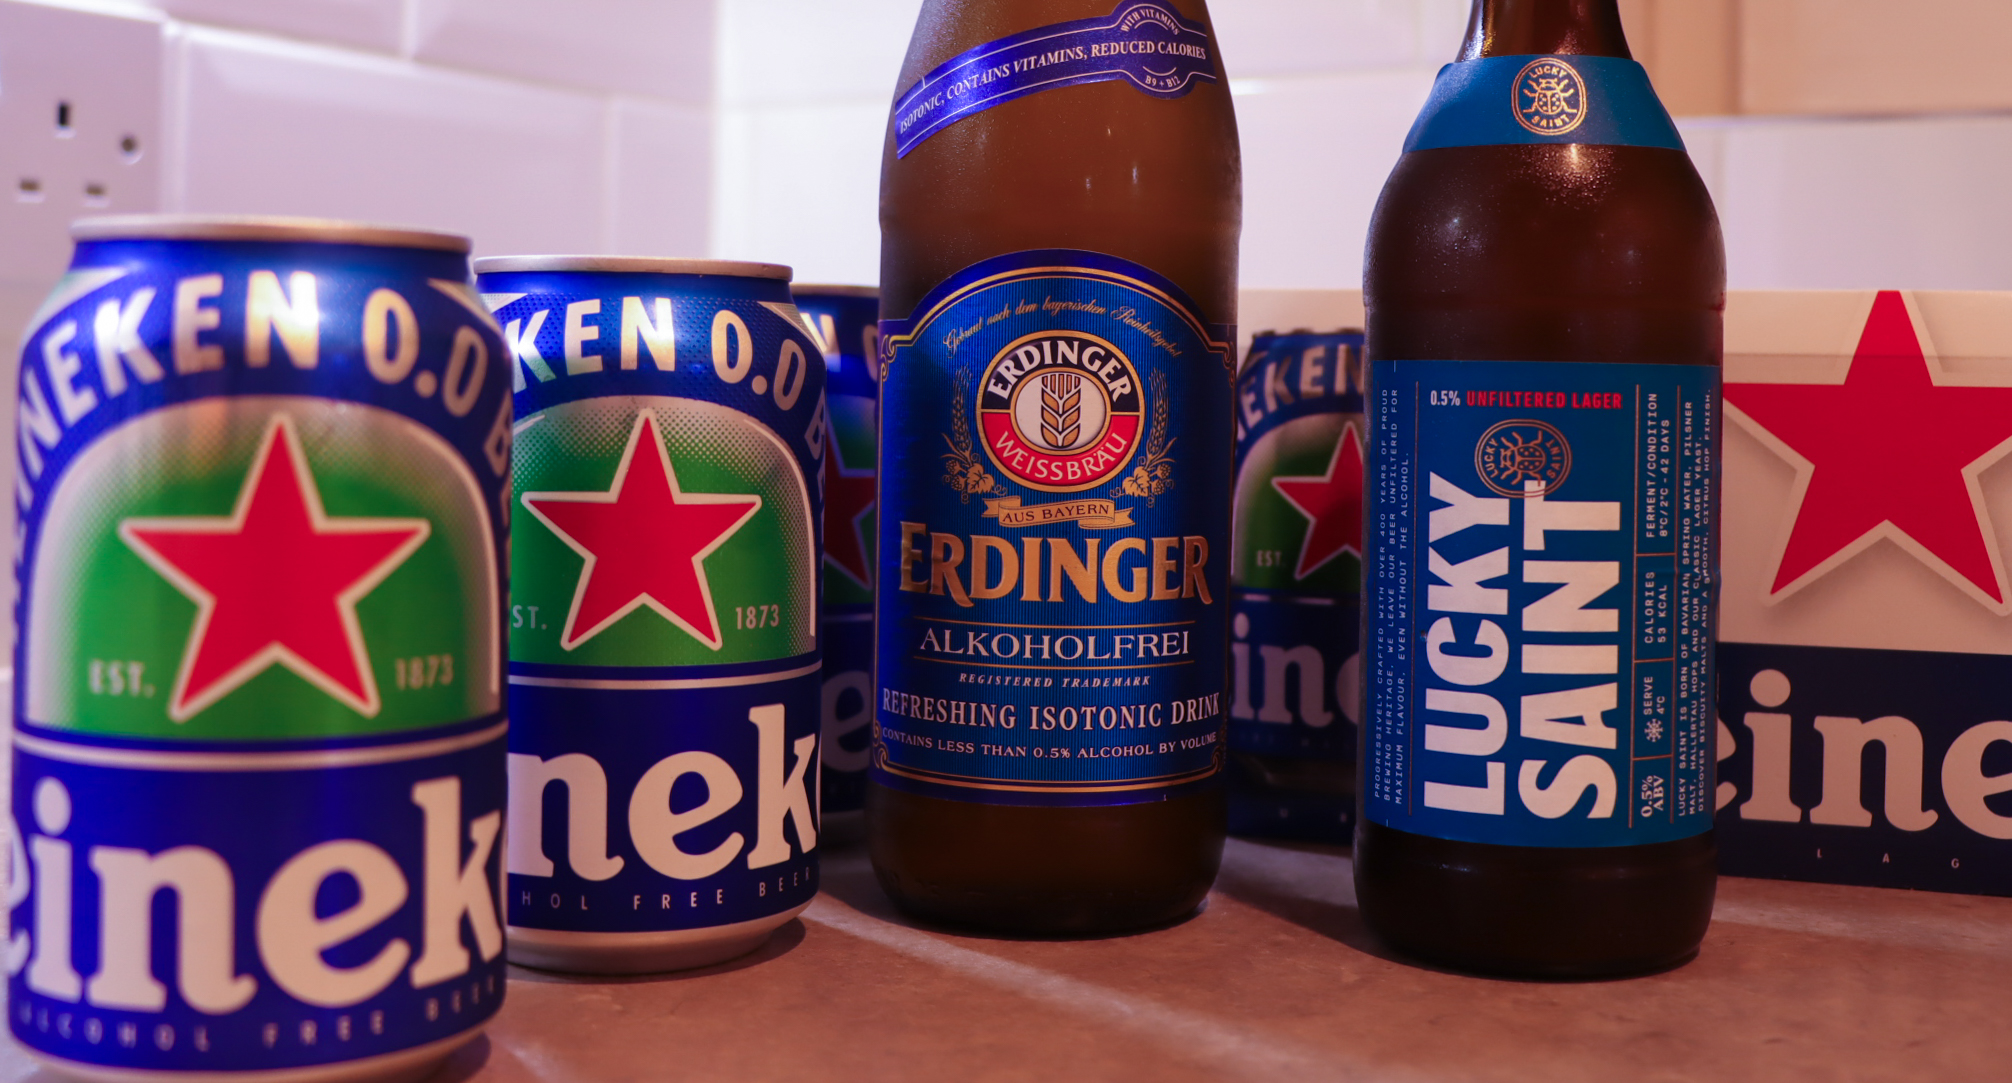 Low alcohol and low calorie beers